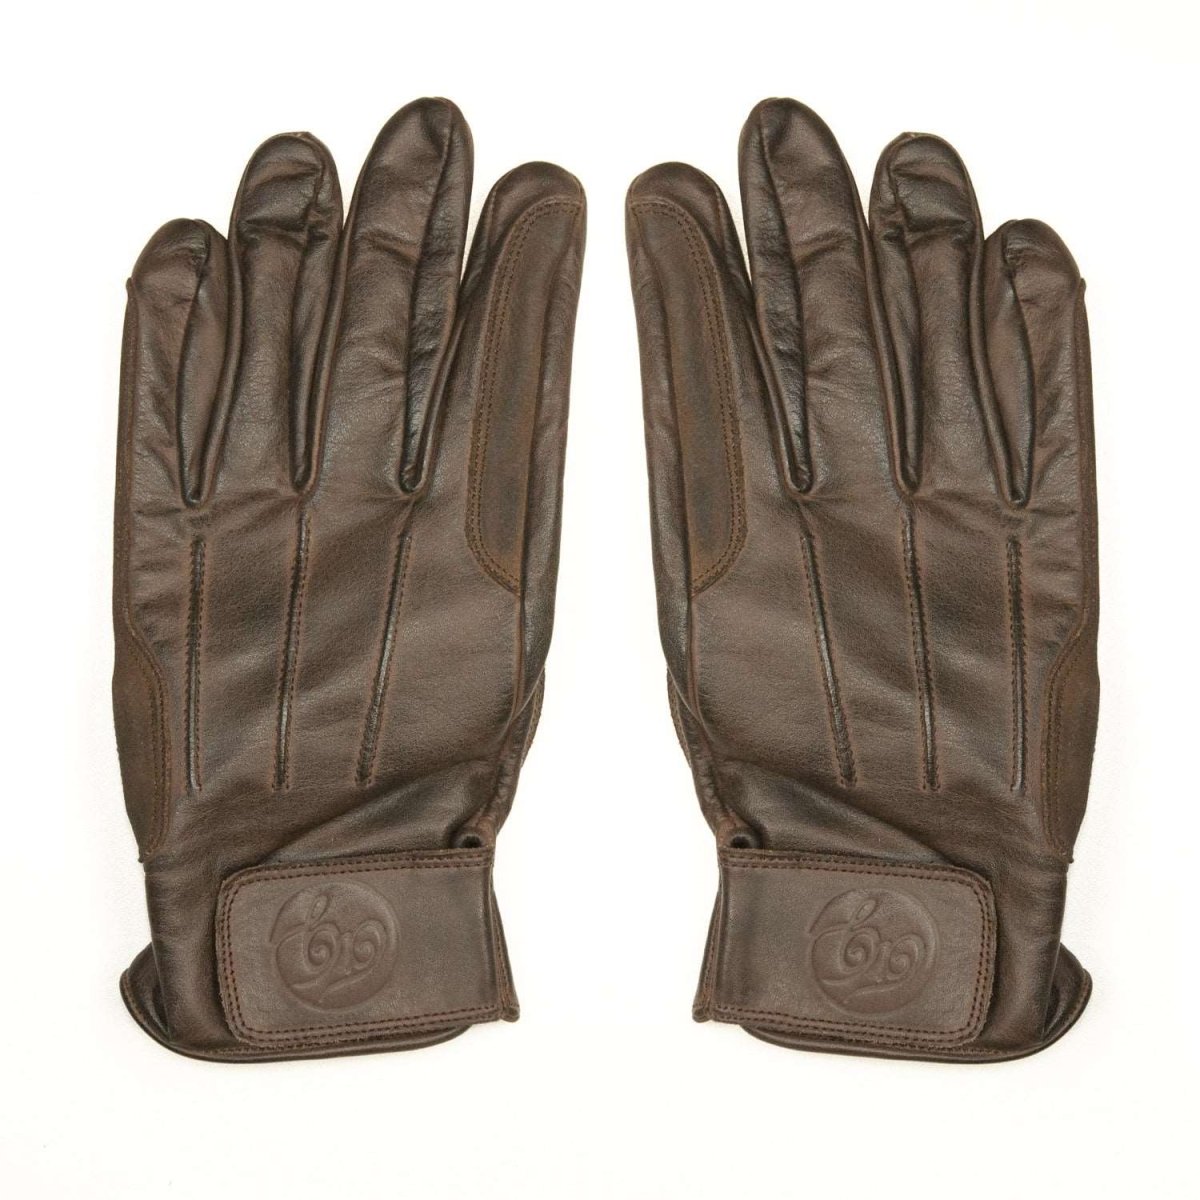 Age of Glory Rover Leather CE Waxed Gloves in Brown 